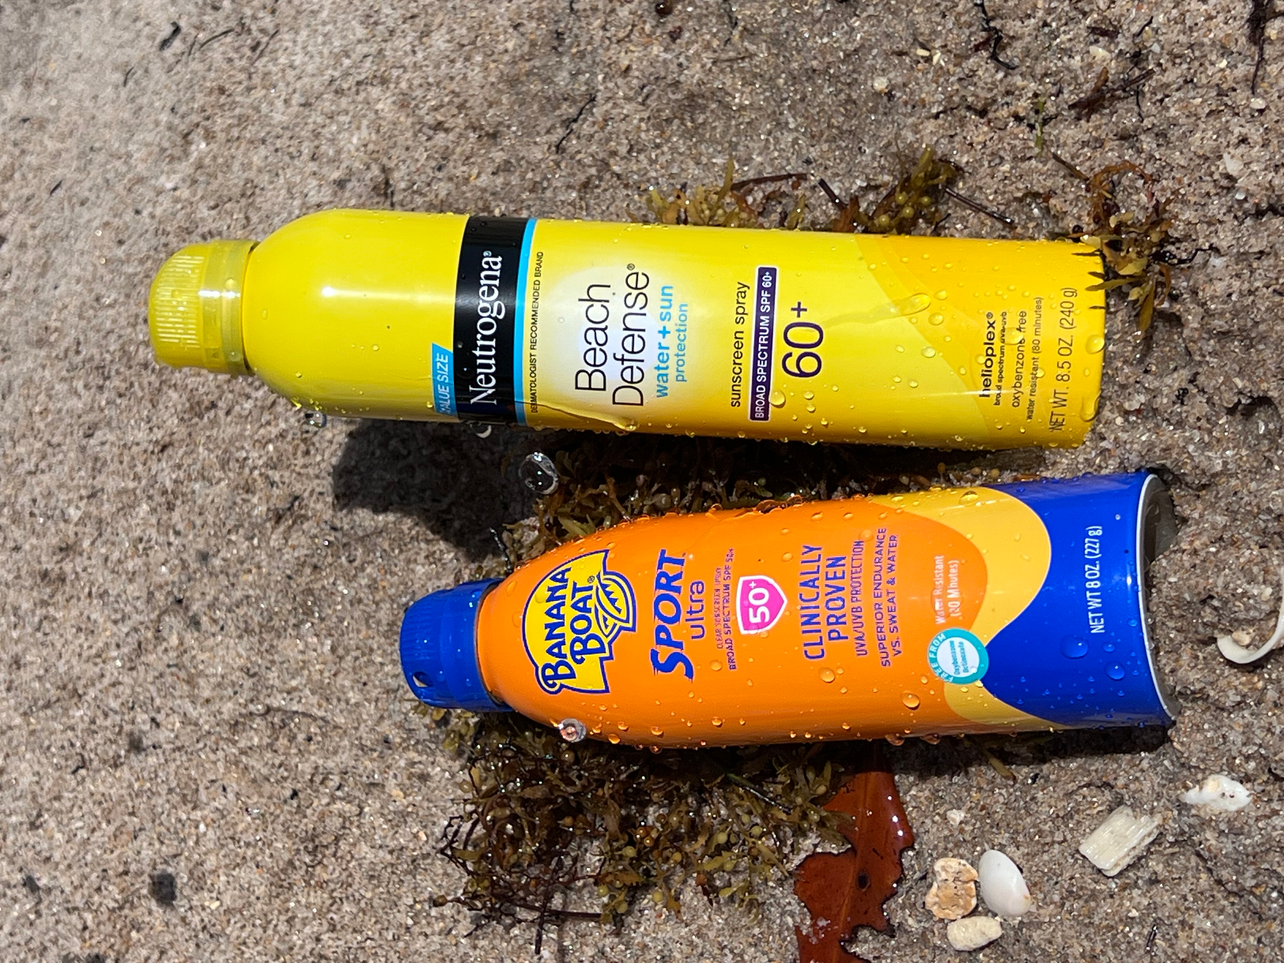 Sunscreen Collection